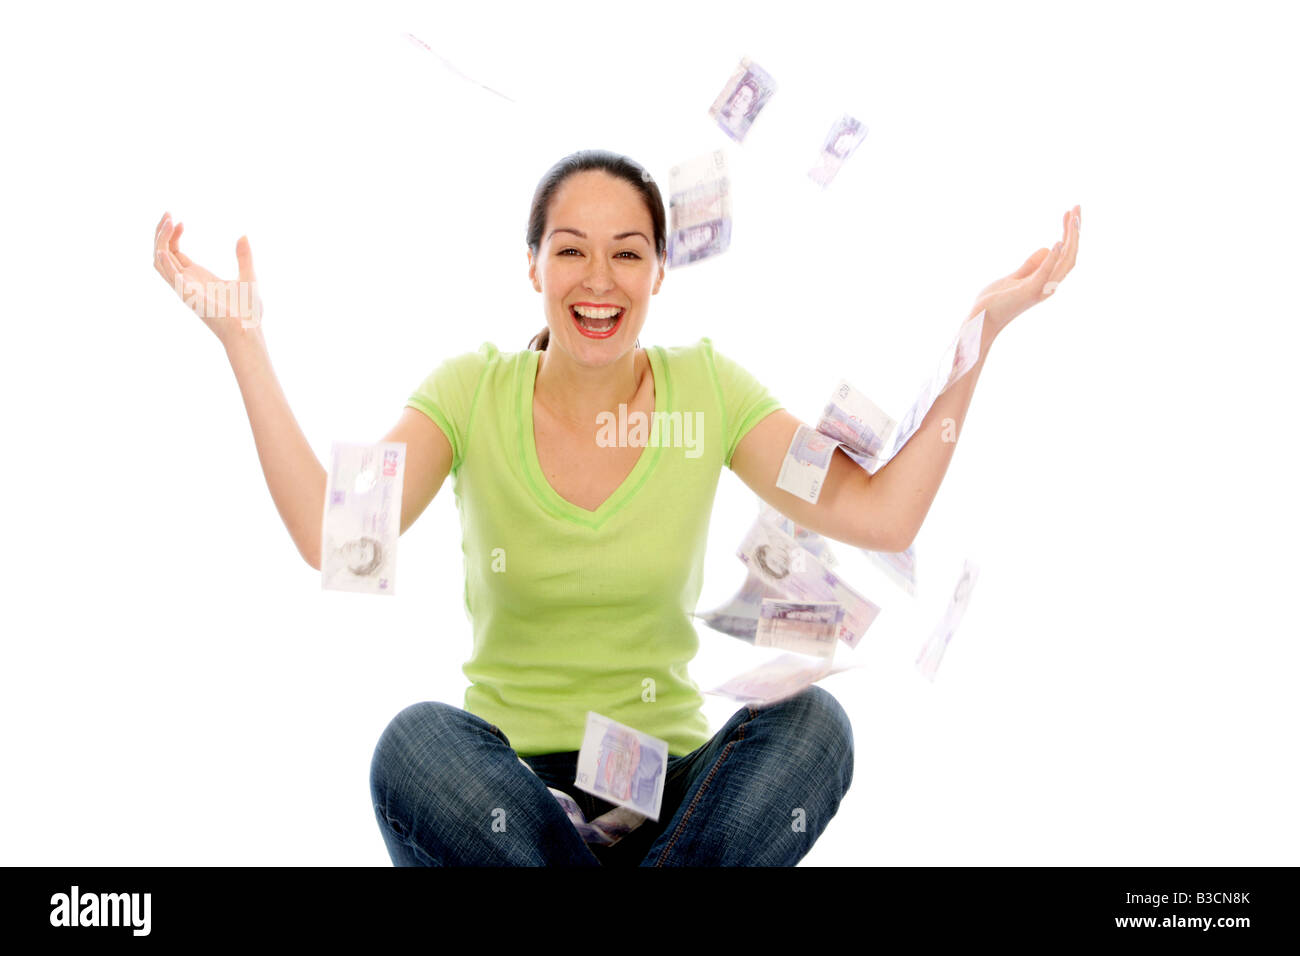 Young Woman Throwing Money in The Air Model Released Stock Photo